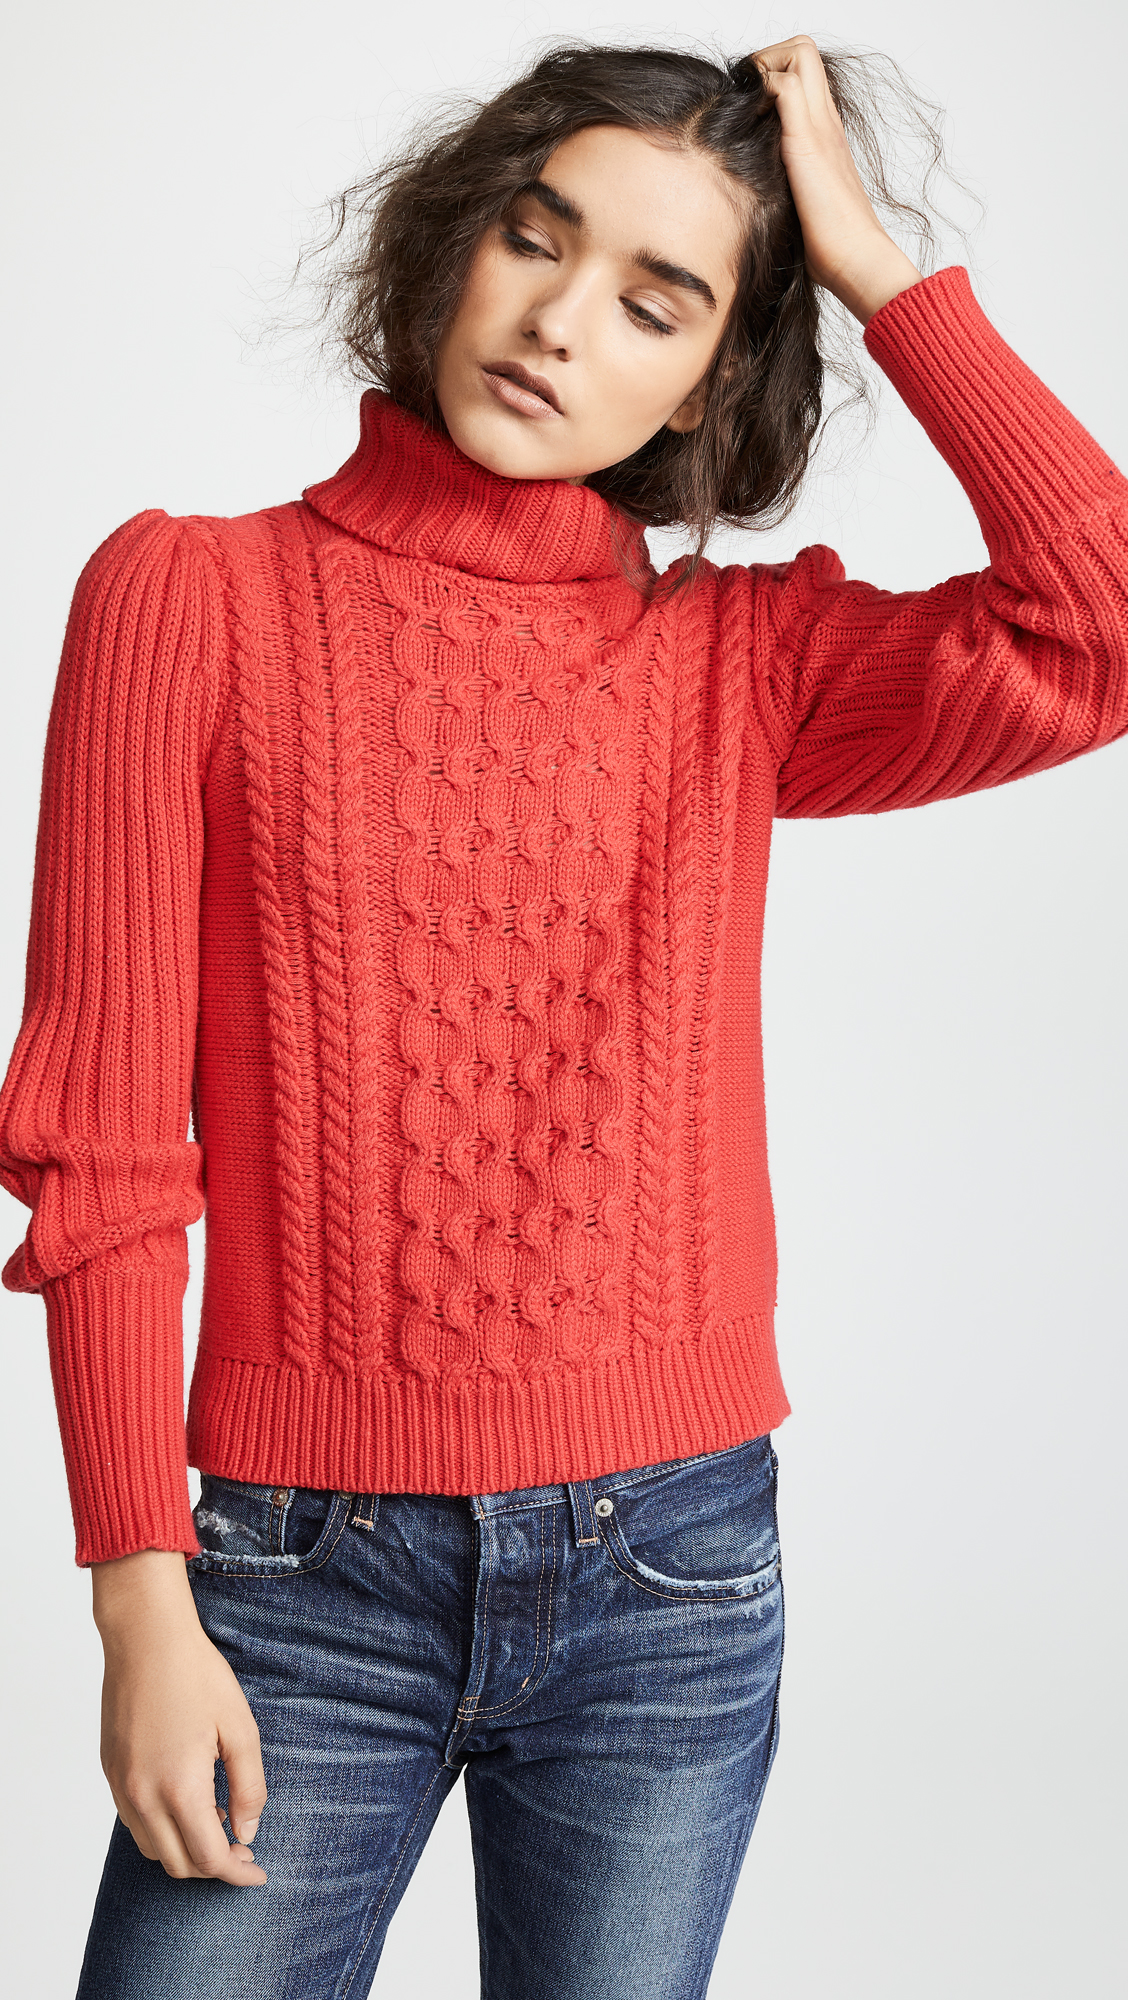 bop-basics-cable-knit-turtleneck-sweater-coral-light-blue-puff-sleeves ...